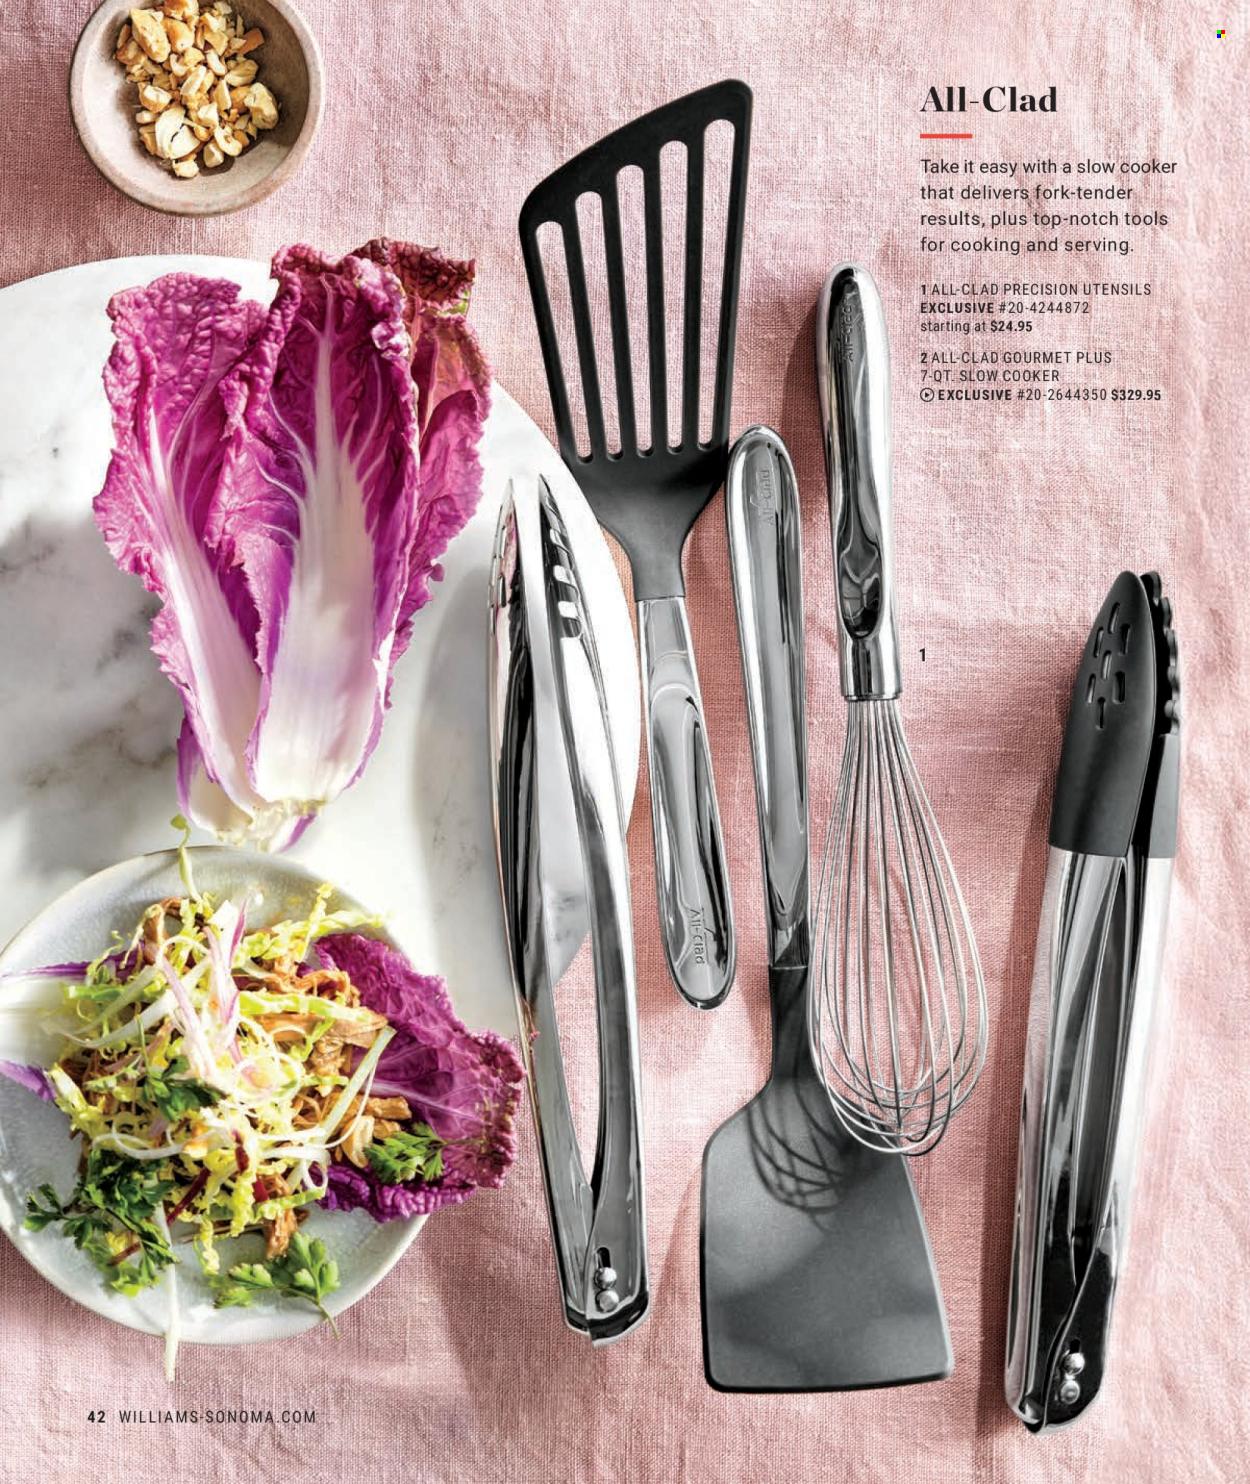 thumbnail - Williams-Sonoma Flyer - Sales products - fork, utensils, slow cooker. Page 42.